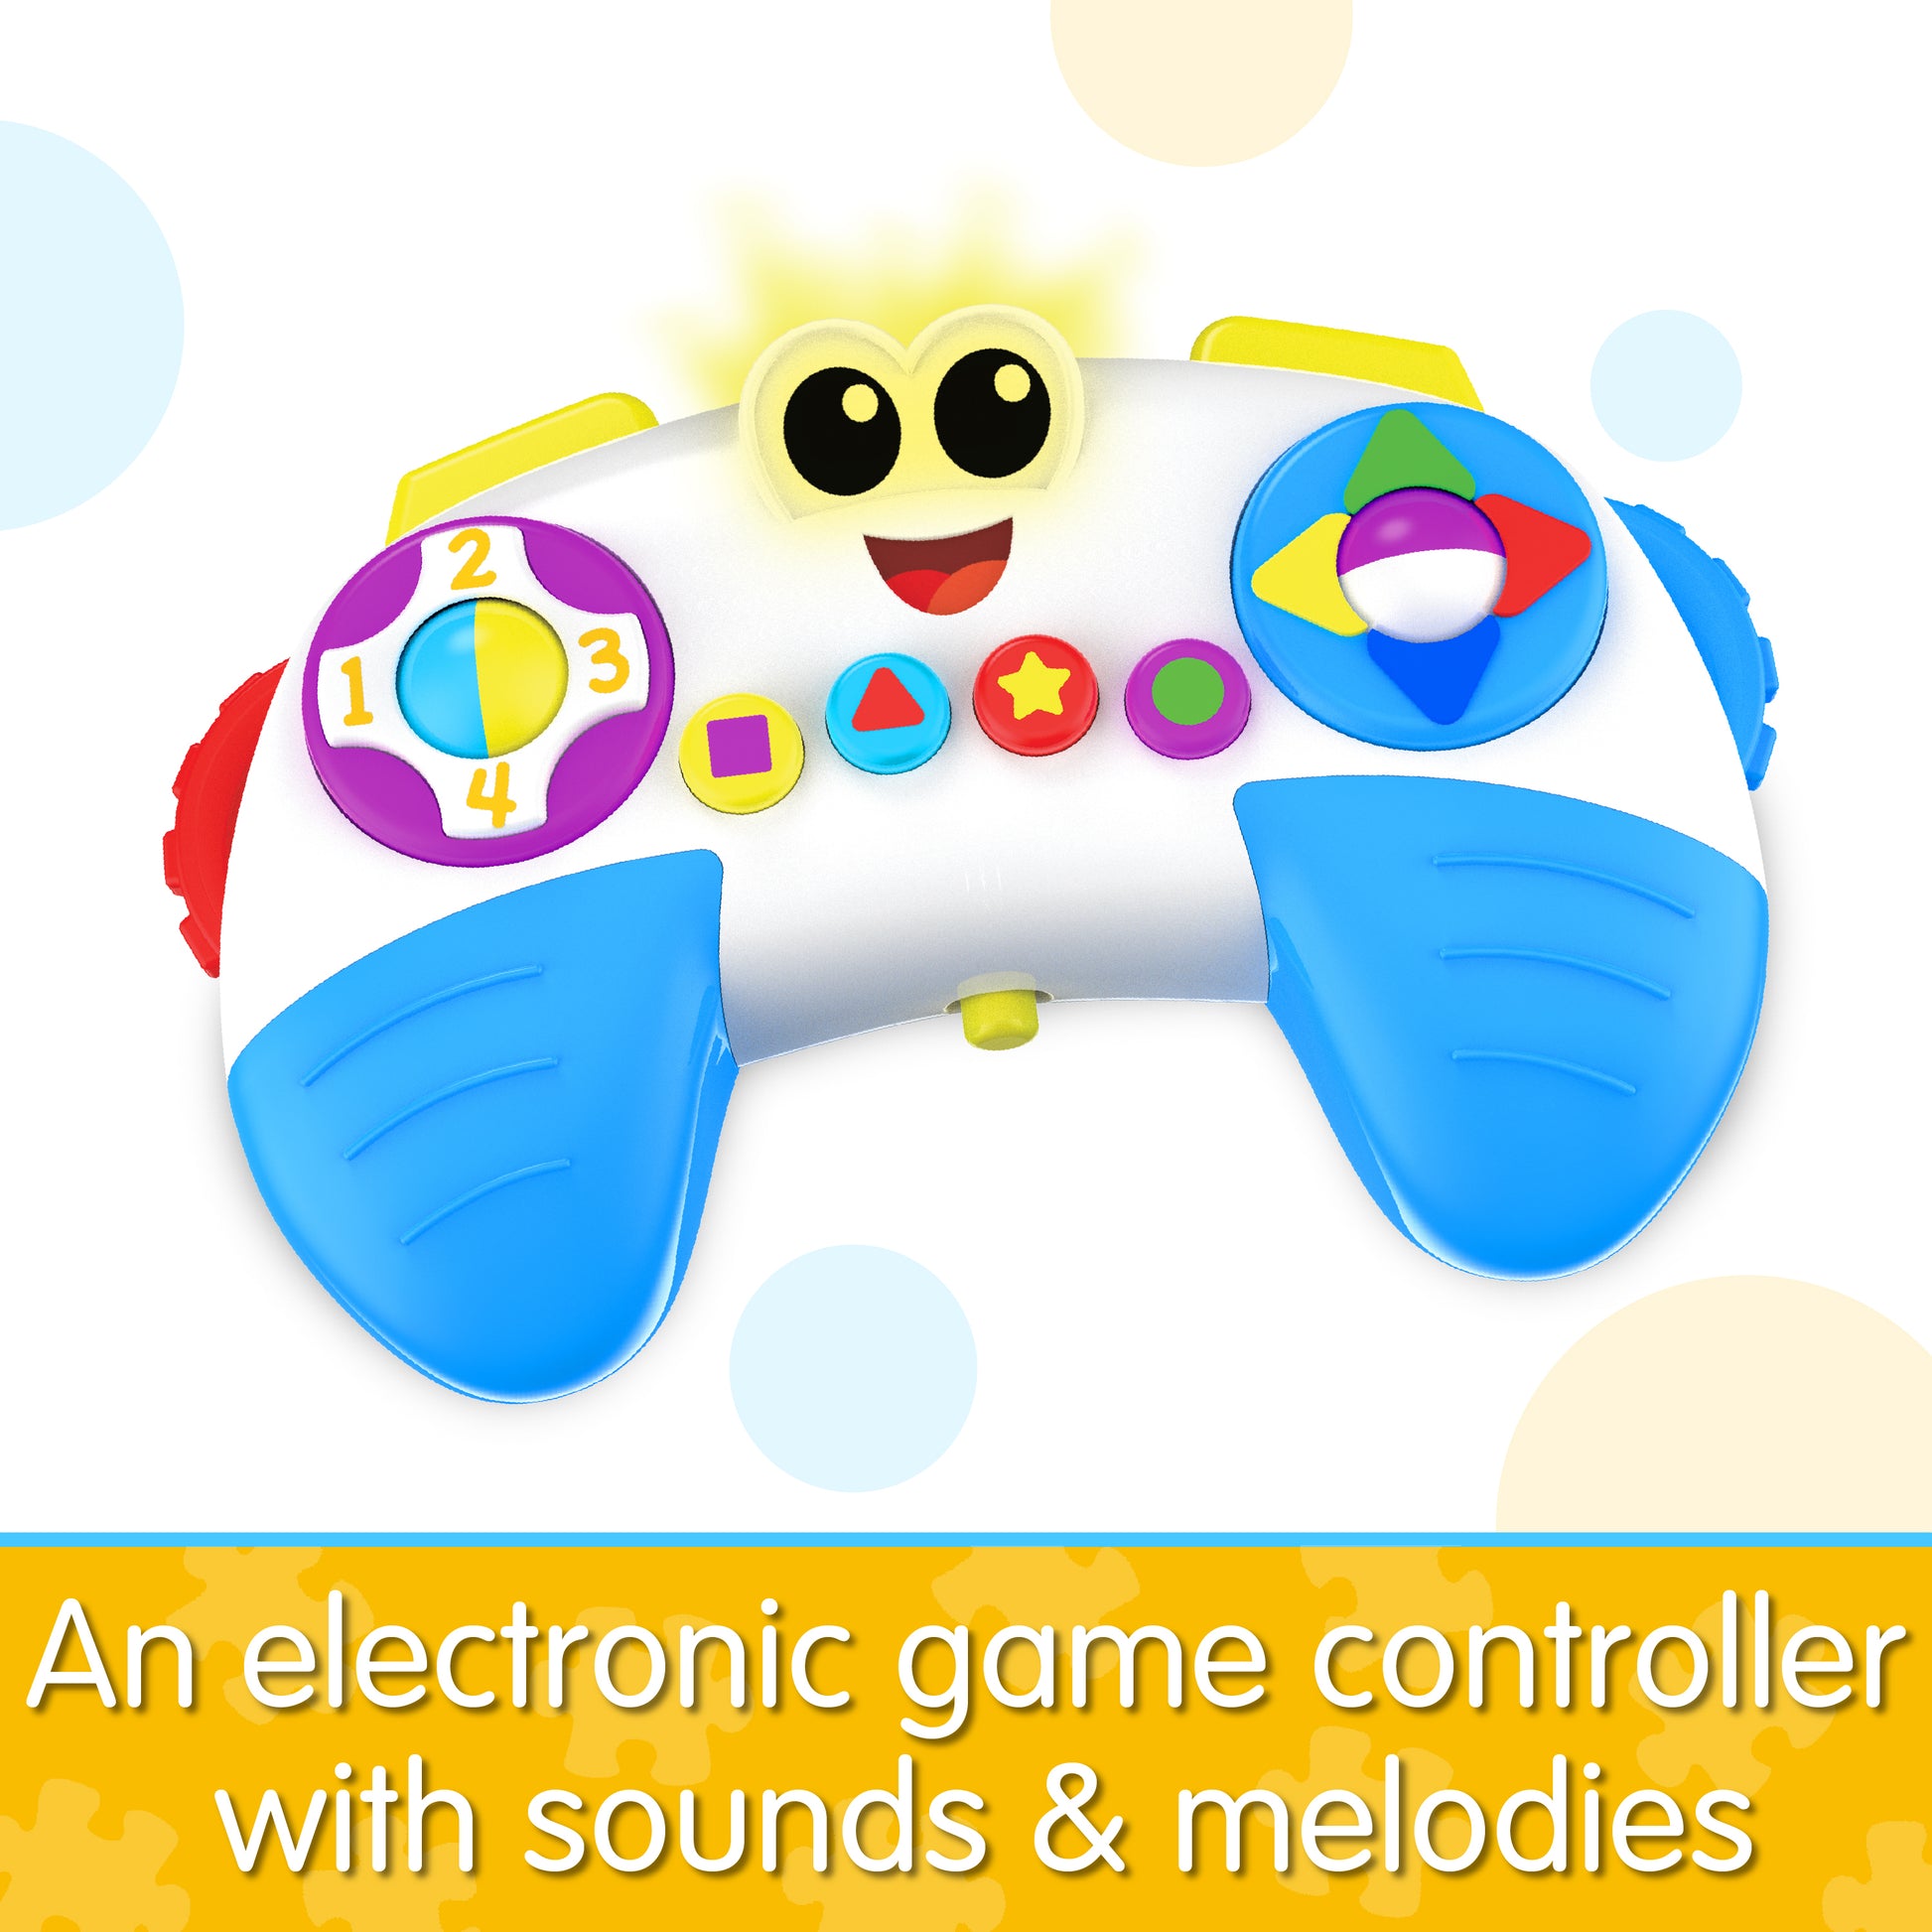 Infographic about On The Go Controller that says, "An electronic game controller with sounds and melodies"